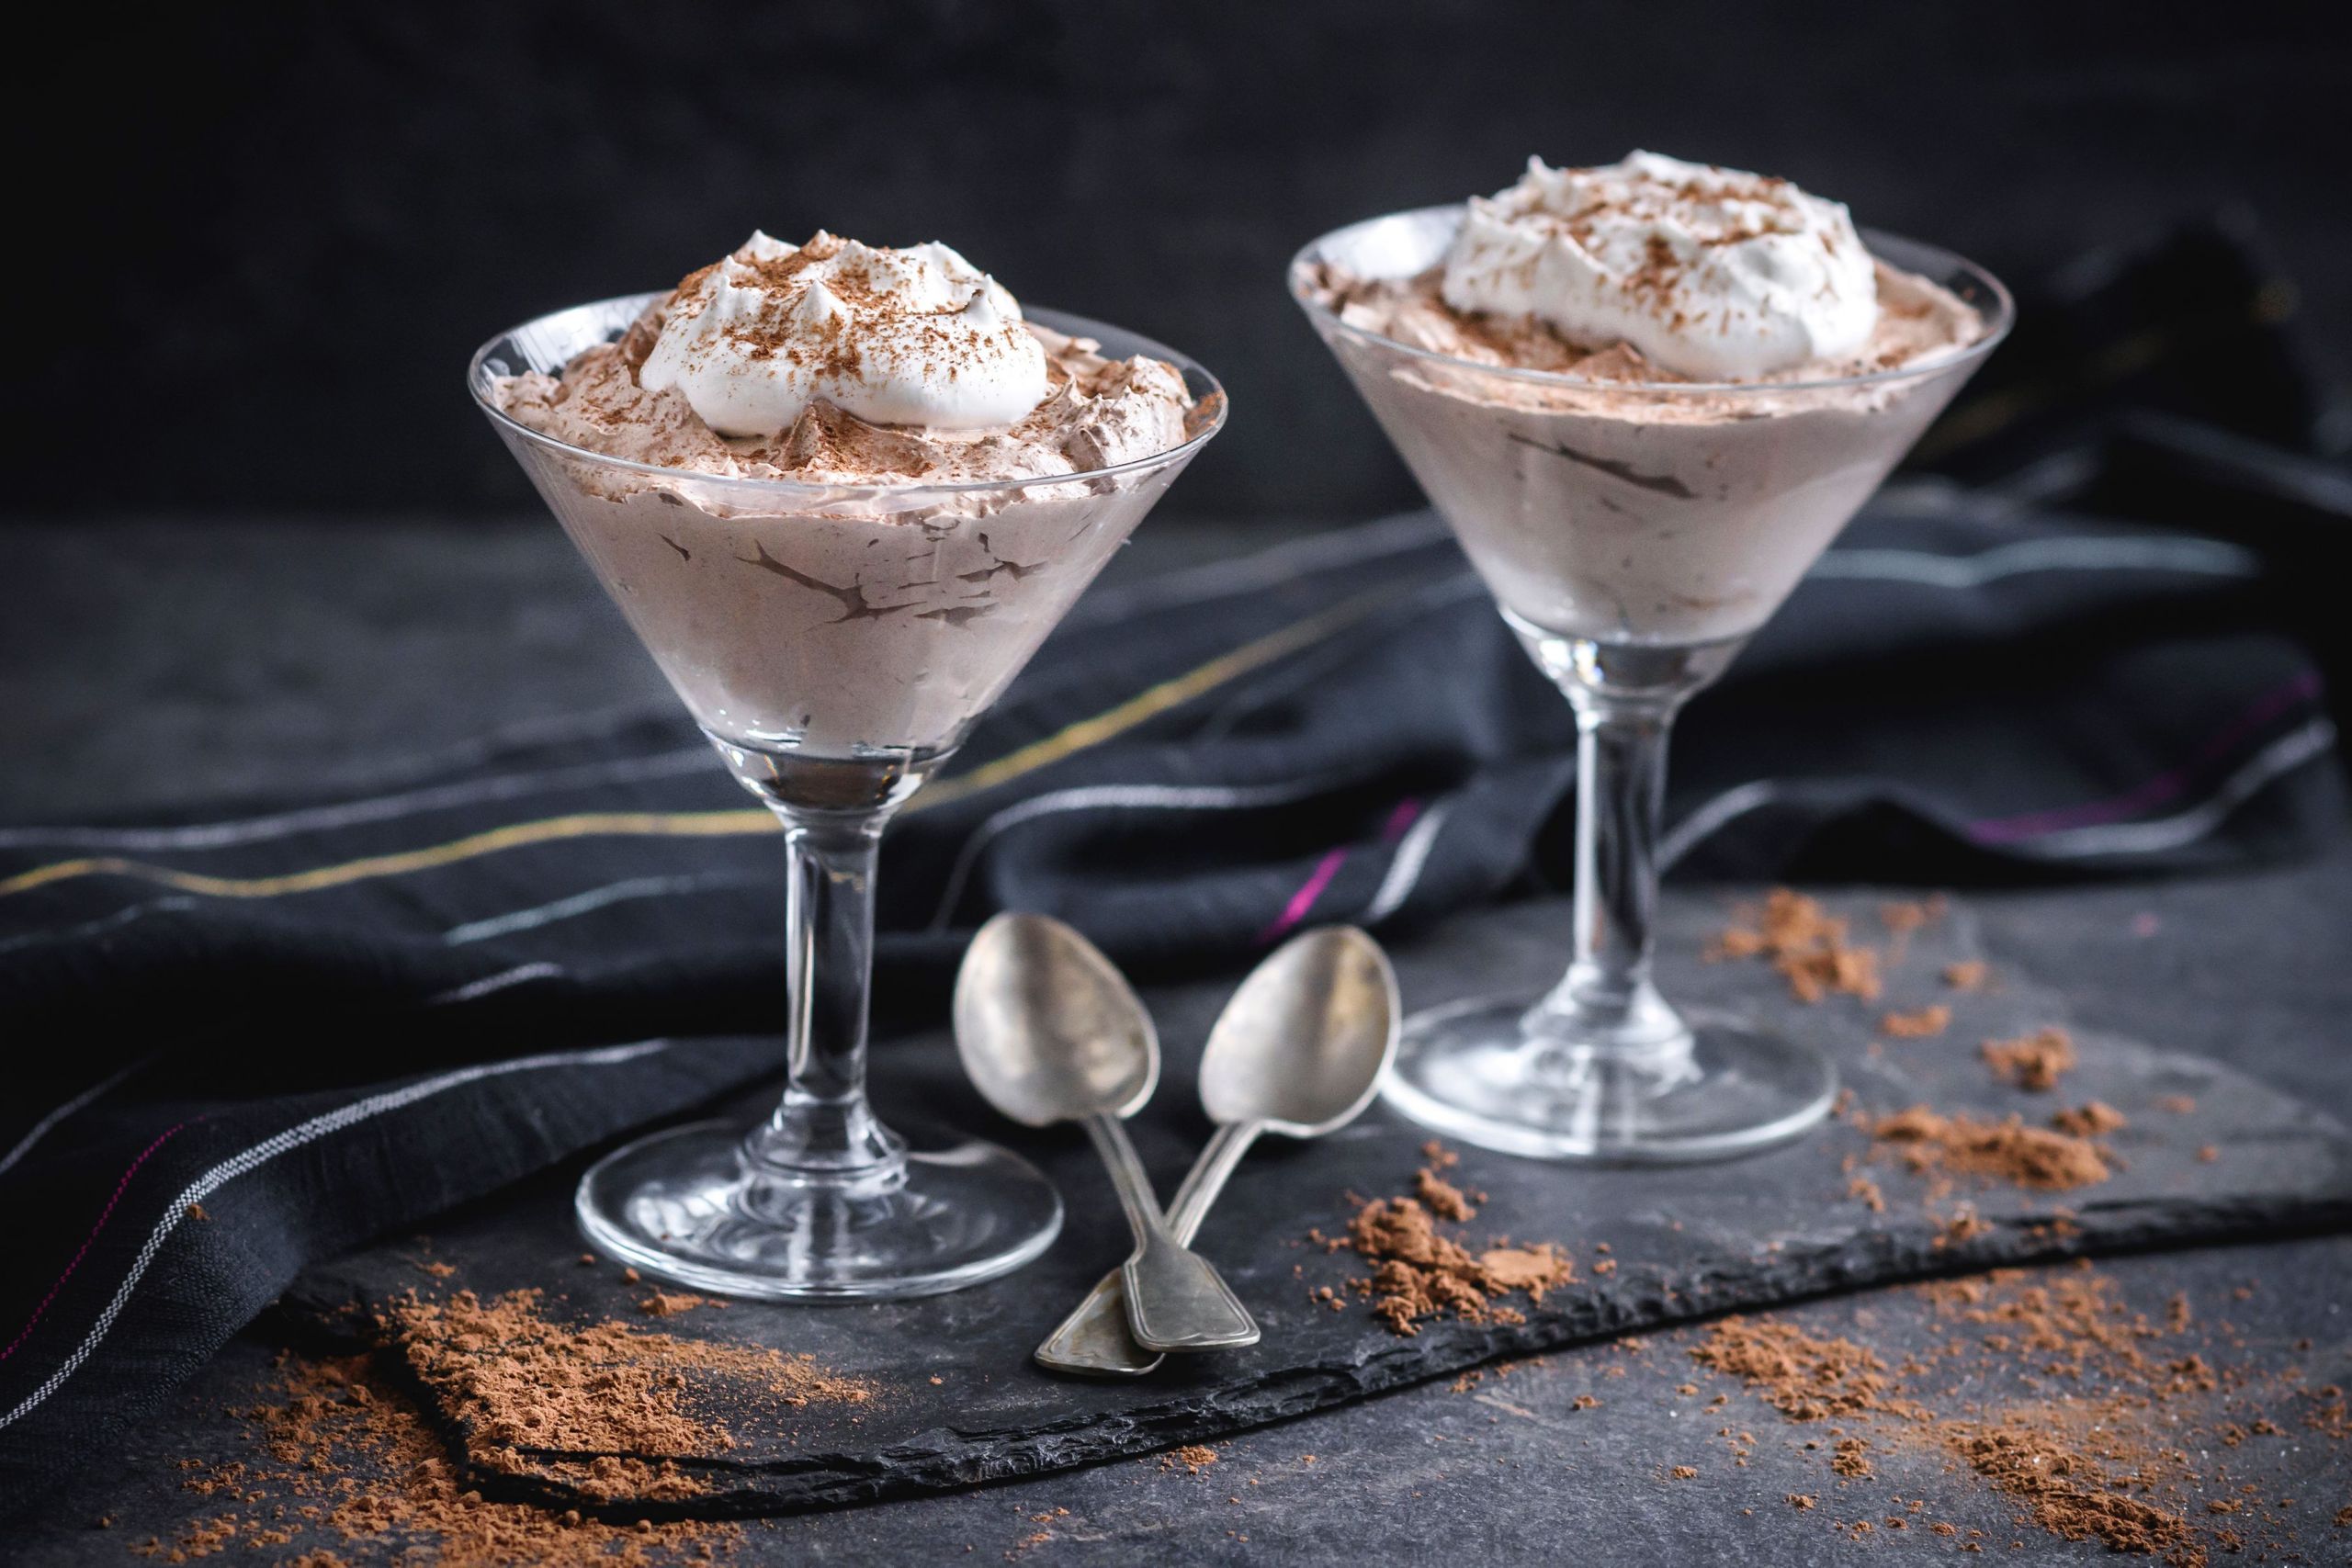 Sugar Free Chocolate Mousse Luxury A Rich Sugar Free Chocolate Mousse Recipe